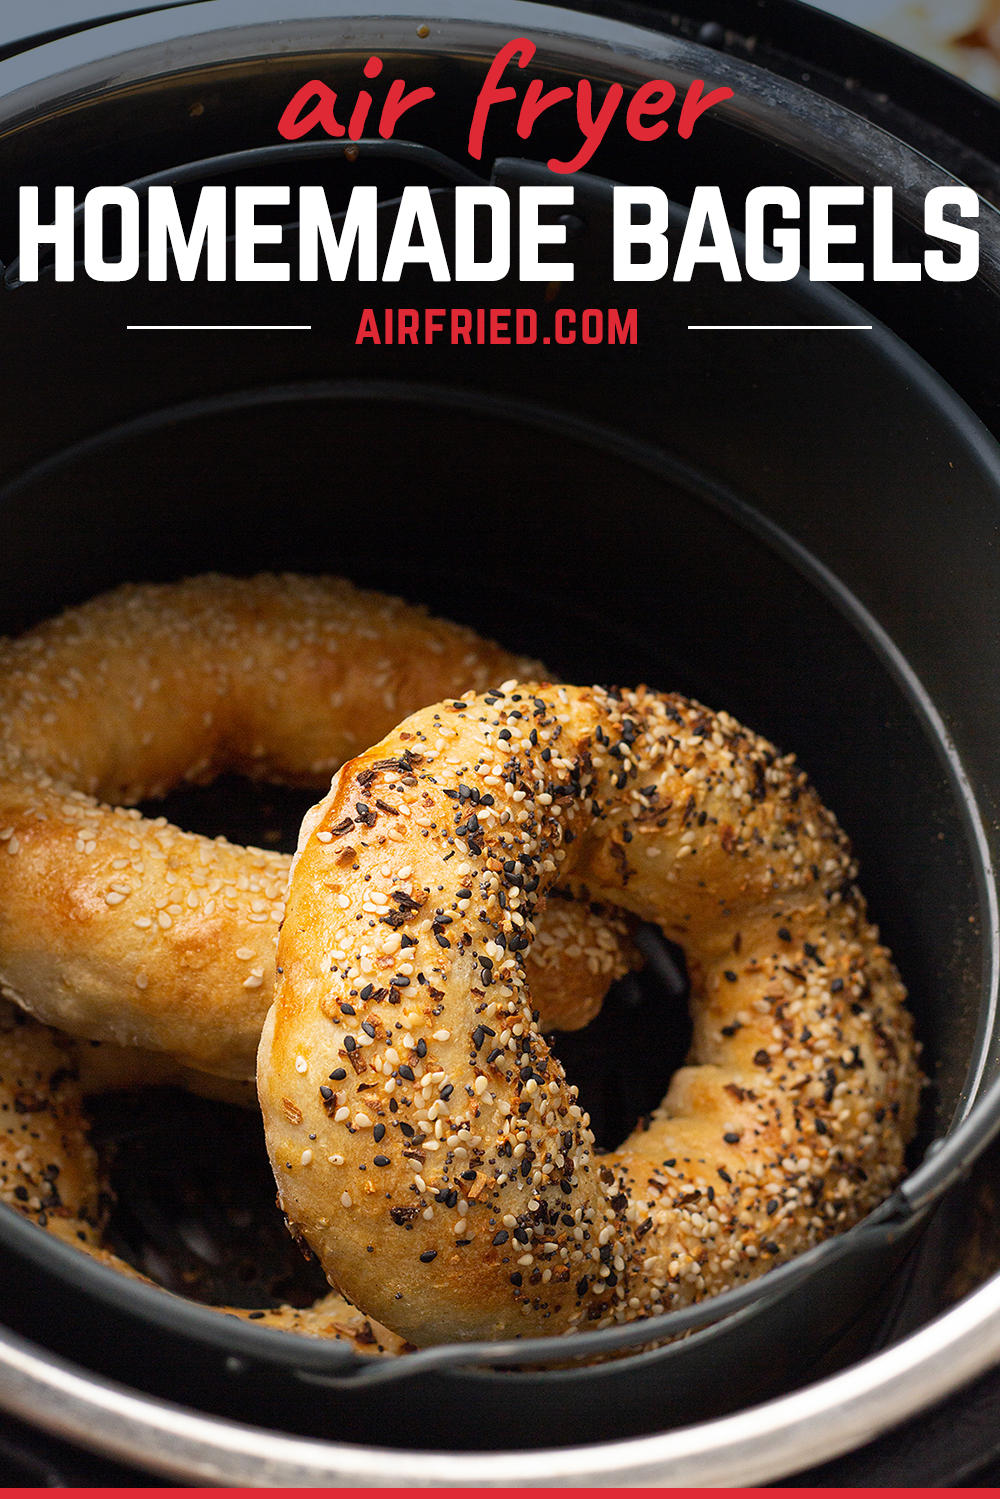 Homemade bagels are more fresh than any packaged bagels you will get your hands on.  Even better than that, you can season them, or not season them, exactly to your liking!